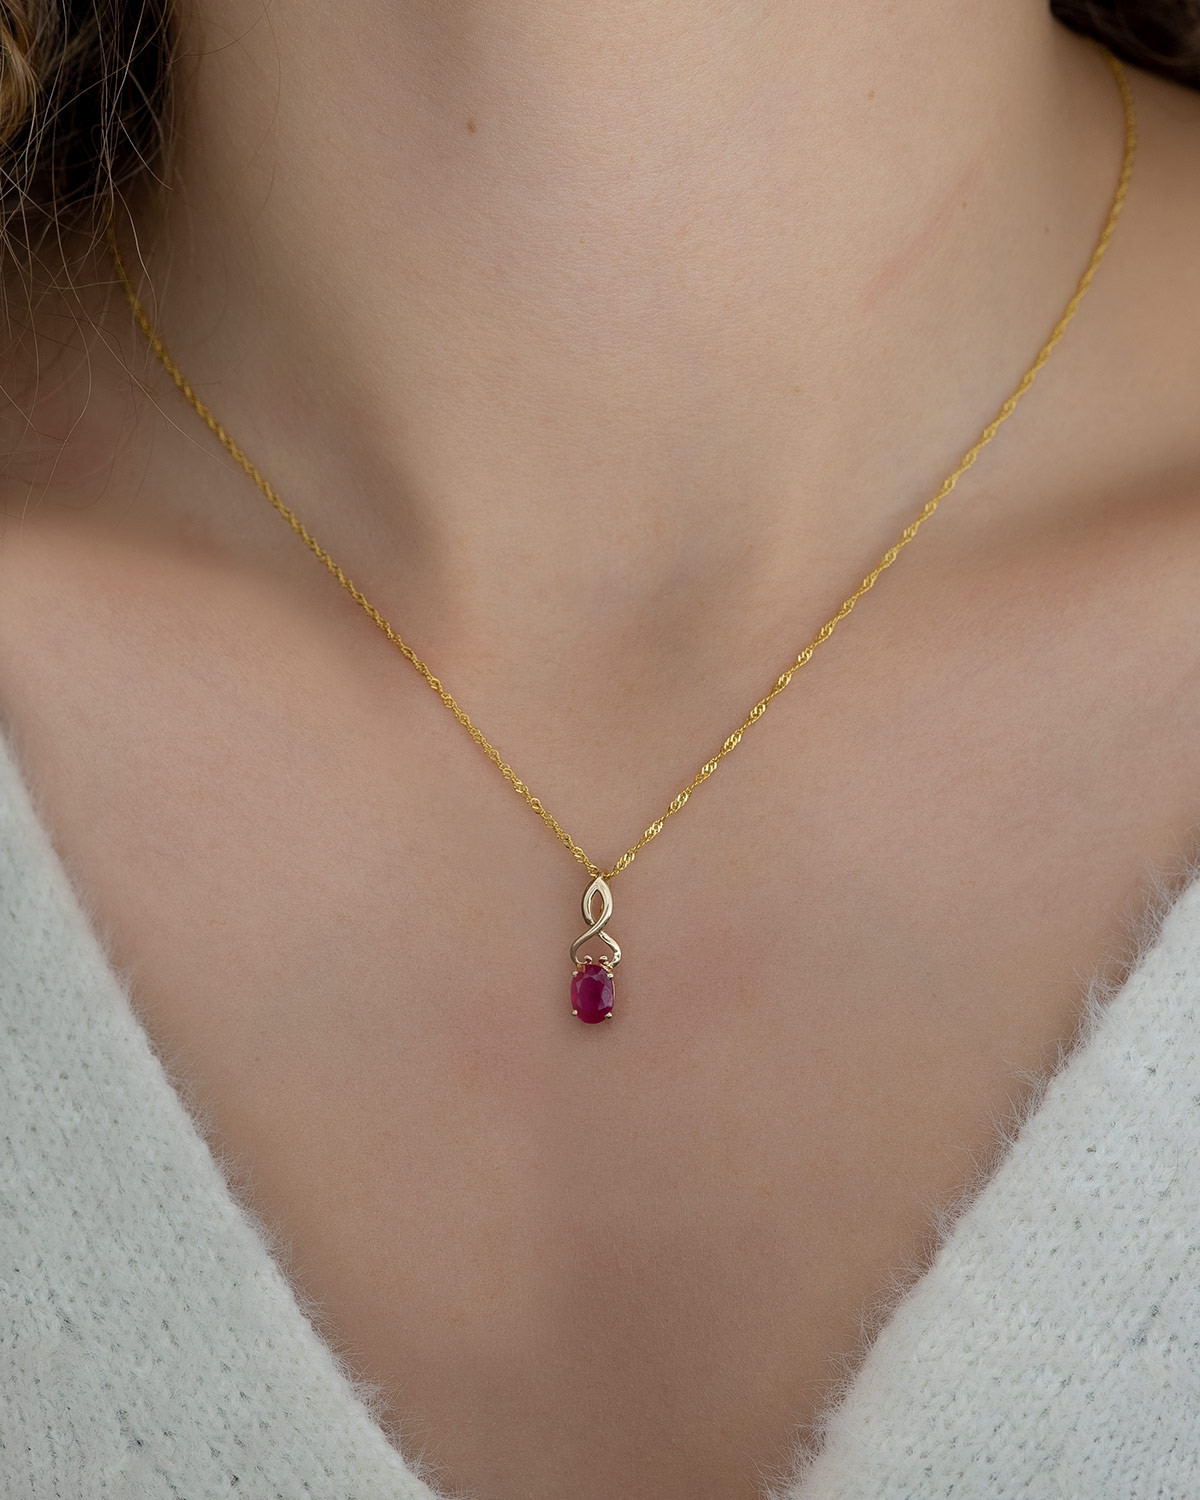 Ruby necklace - 22K Gold Indian Jewelry in USA